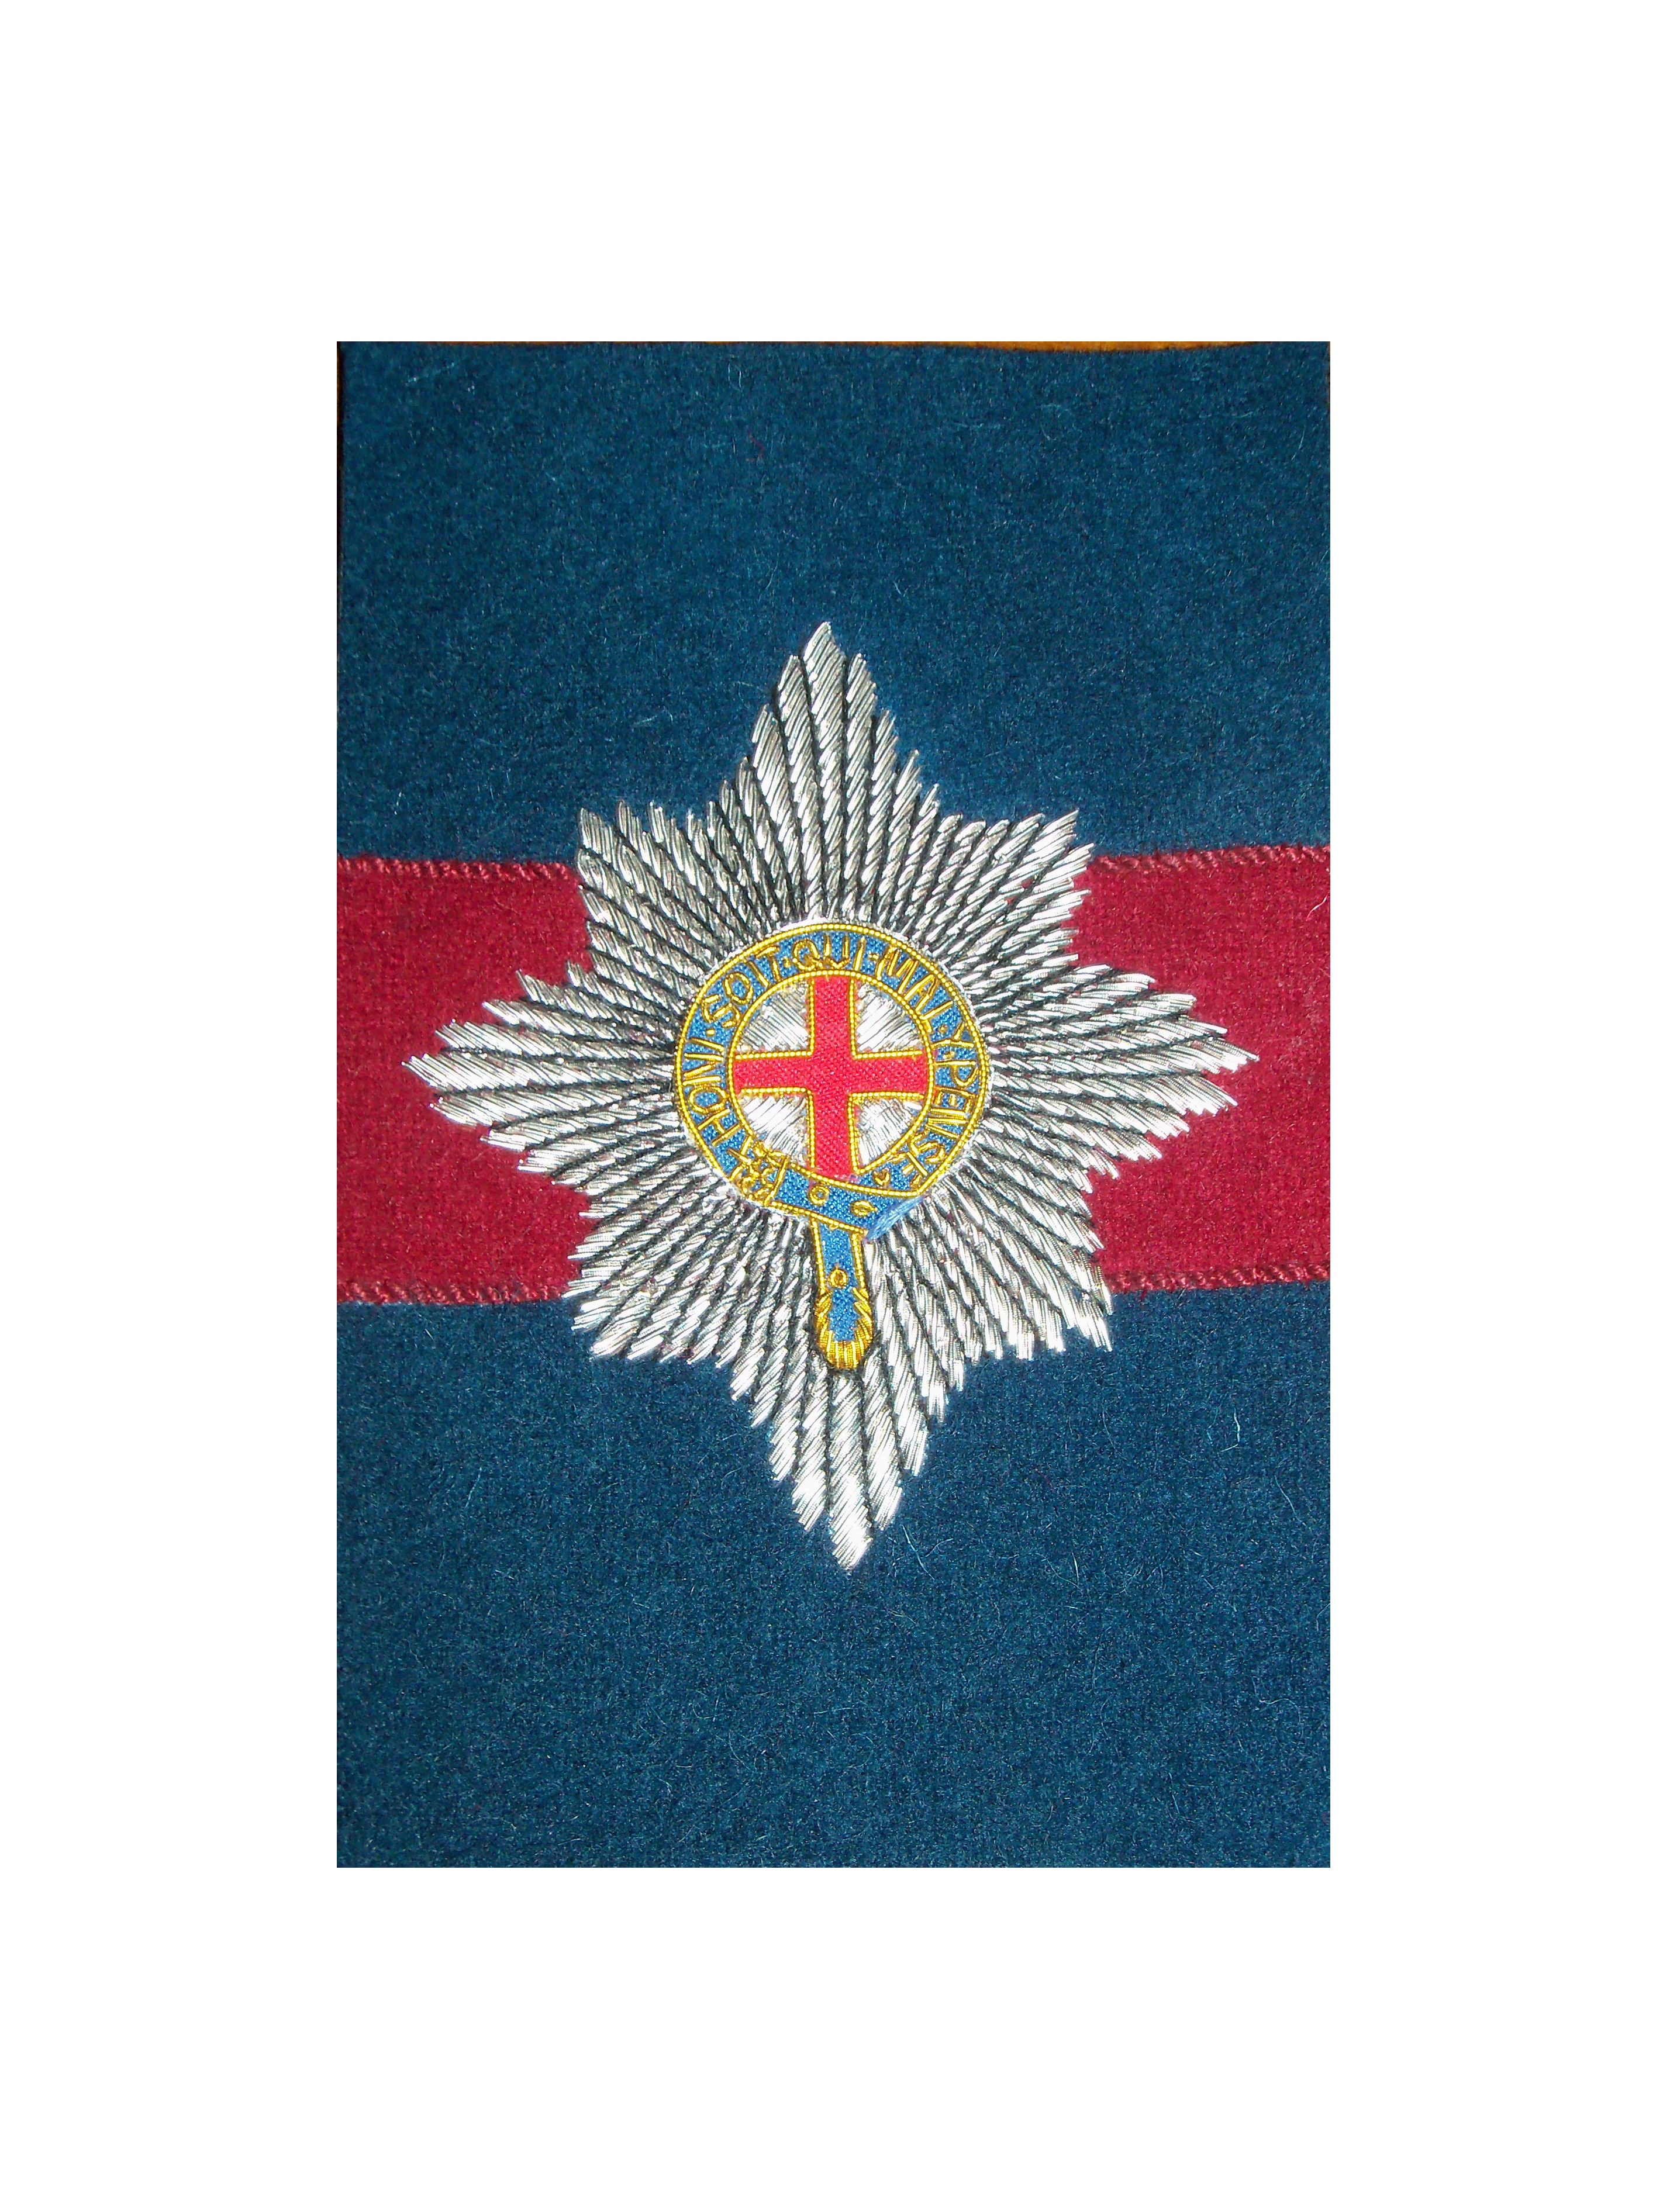 Small Embroidered Badge - Coldstream Guards